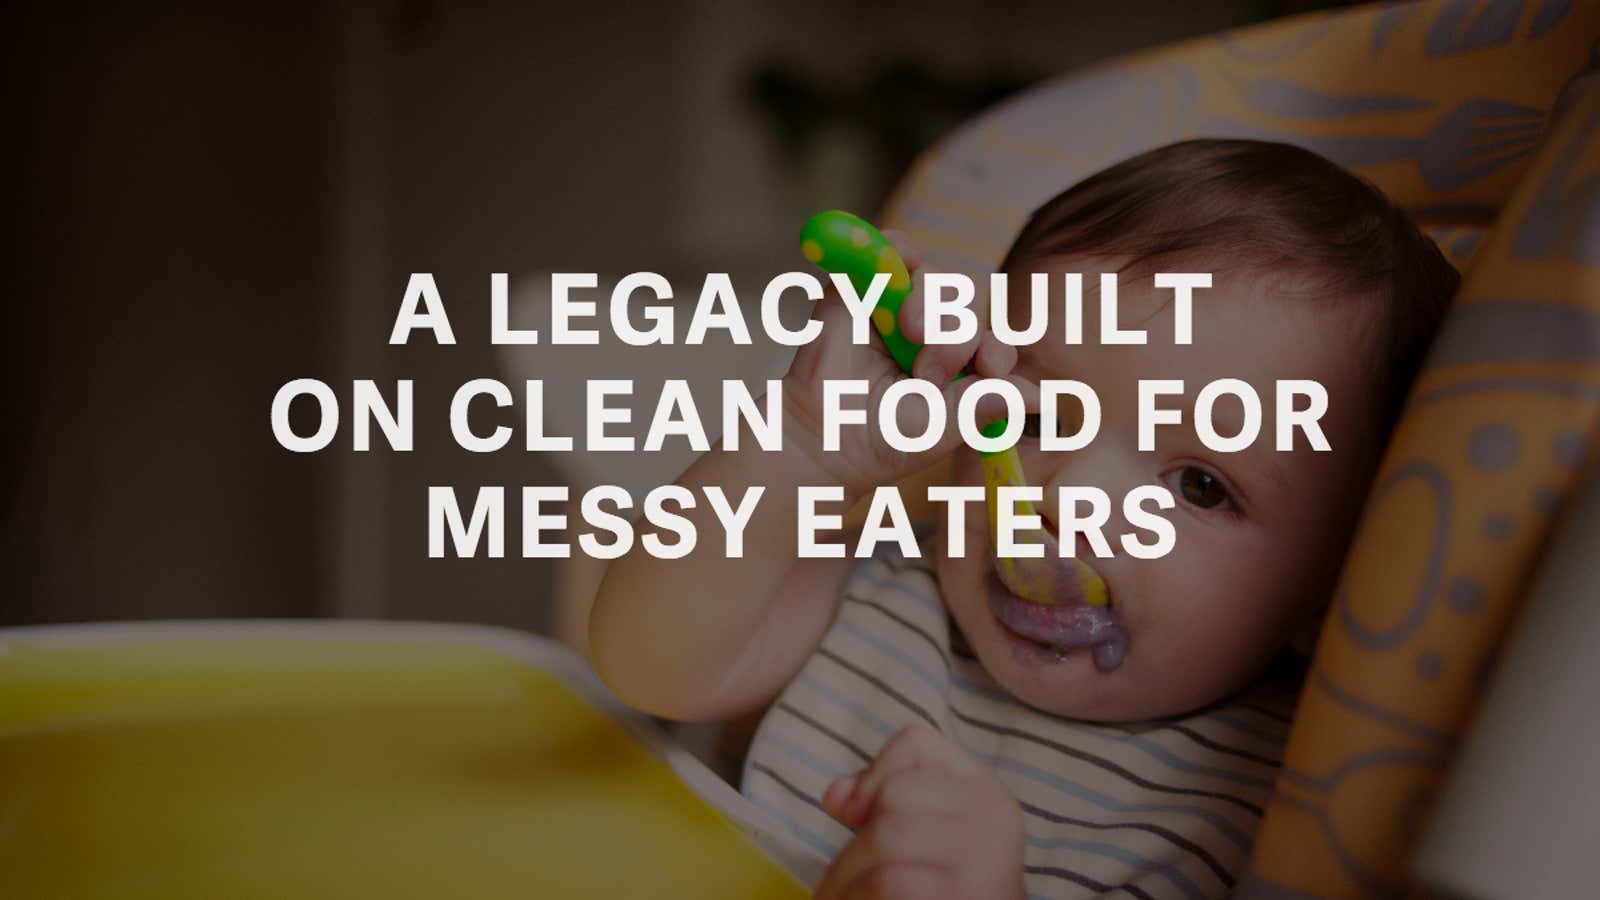 How can a baby food company change the world?